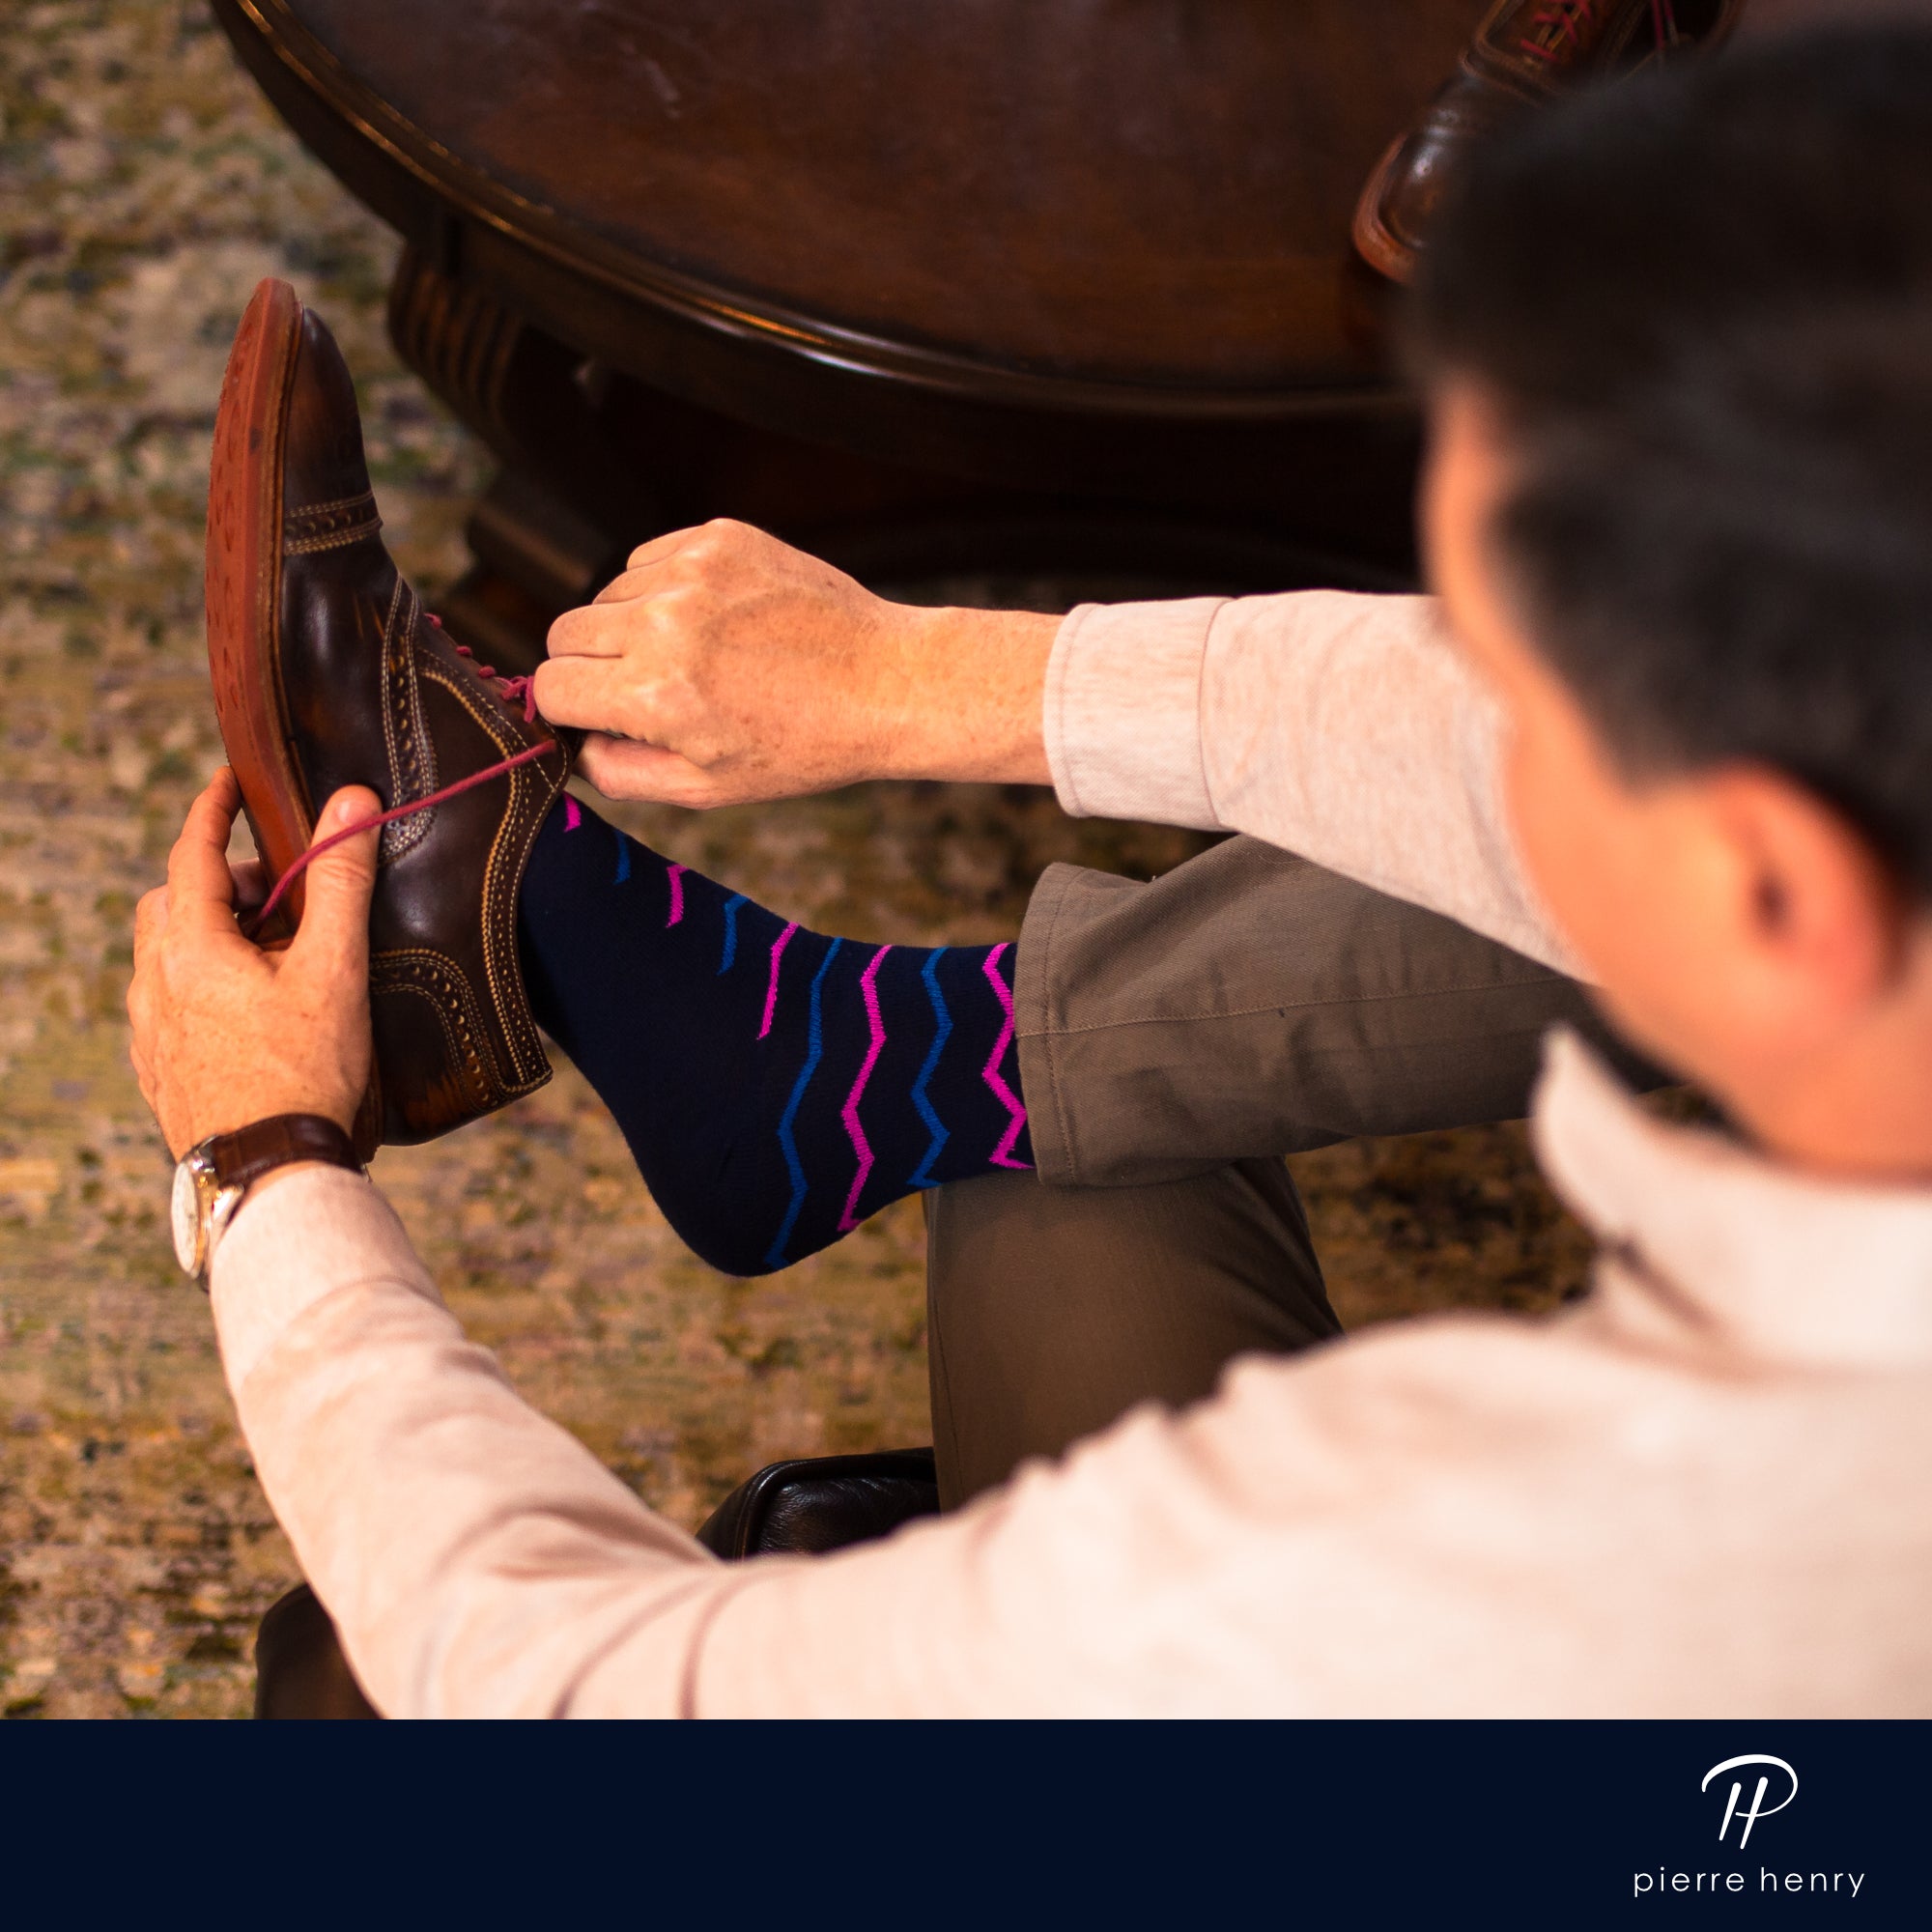 navy blue over the calf dress socks with blue and pink zigzag lines, brown dress shoes with pink laces, brown watch, brown pants